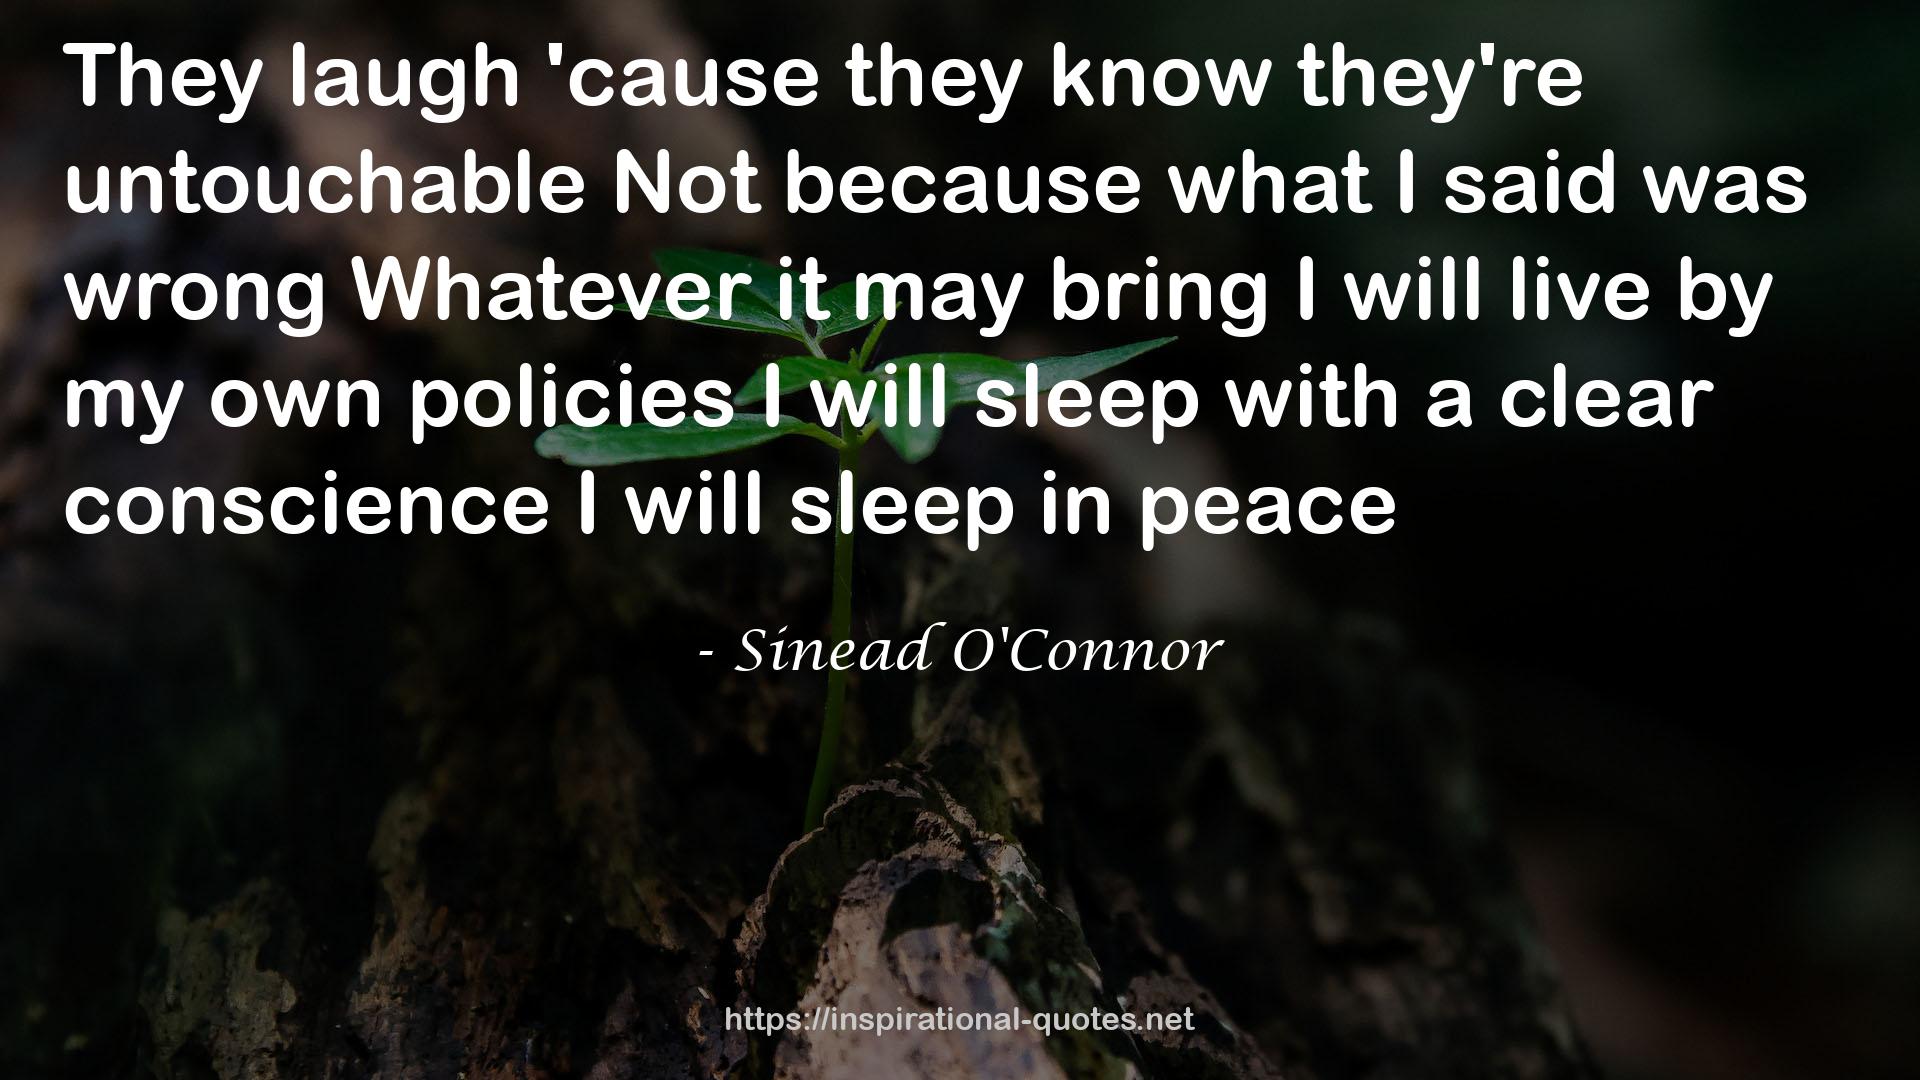 Sinead O'Connor QUOTES